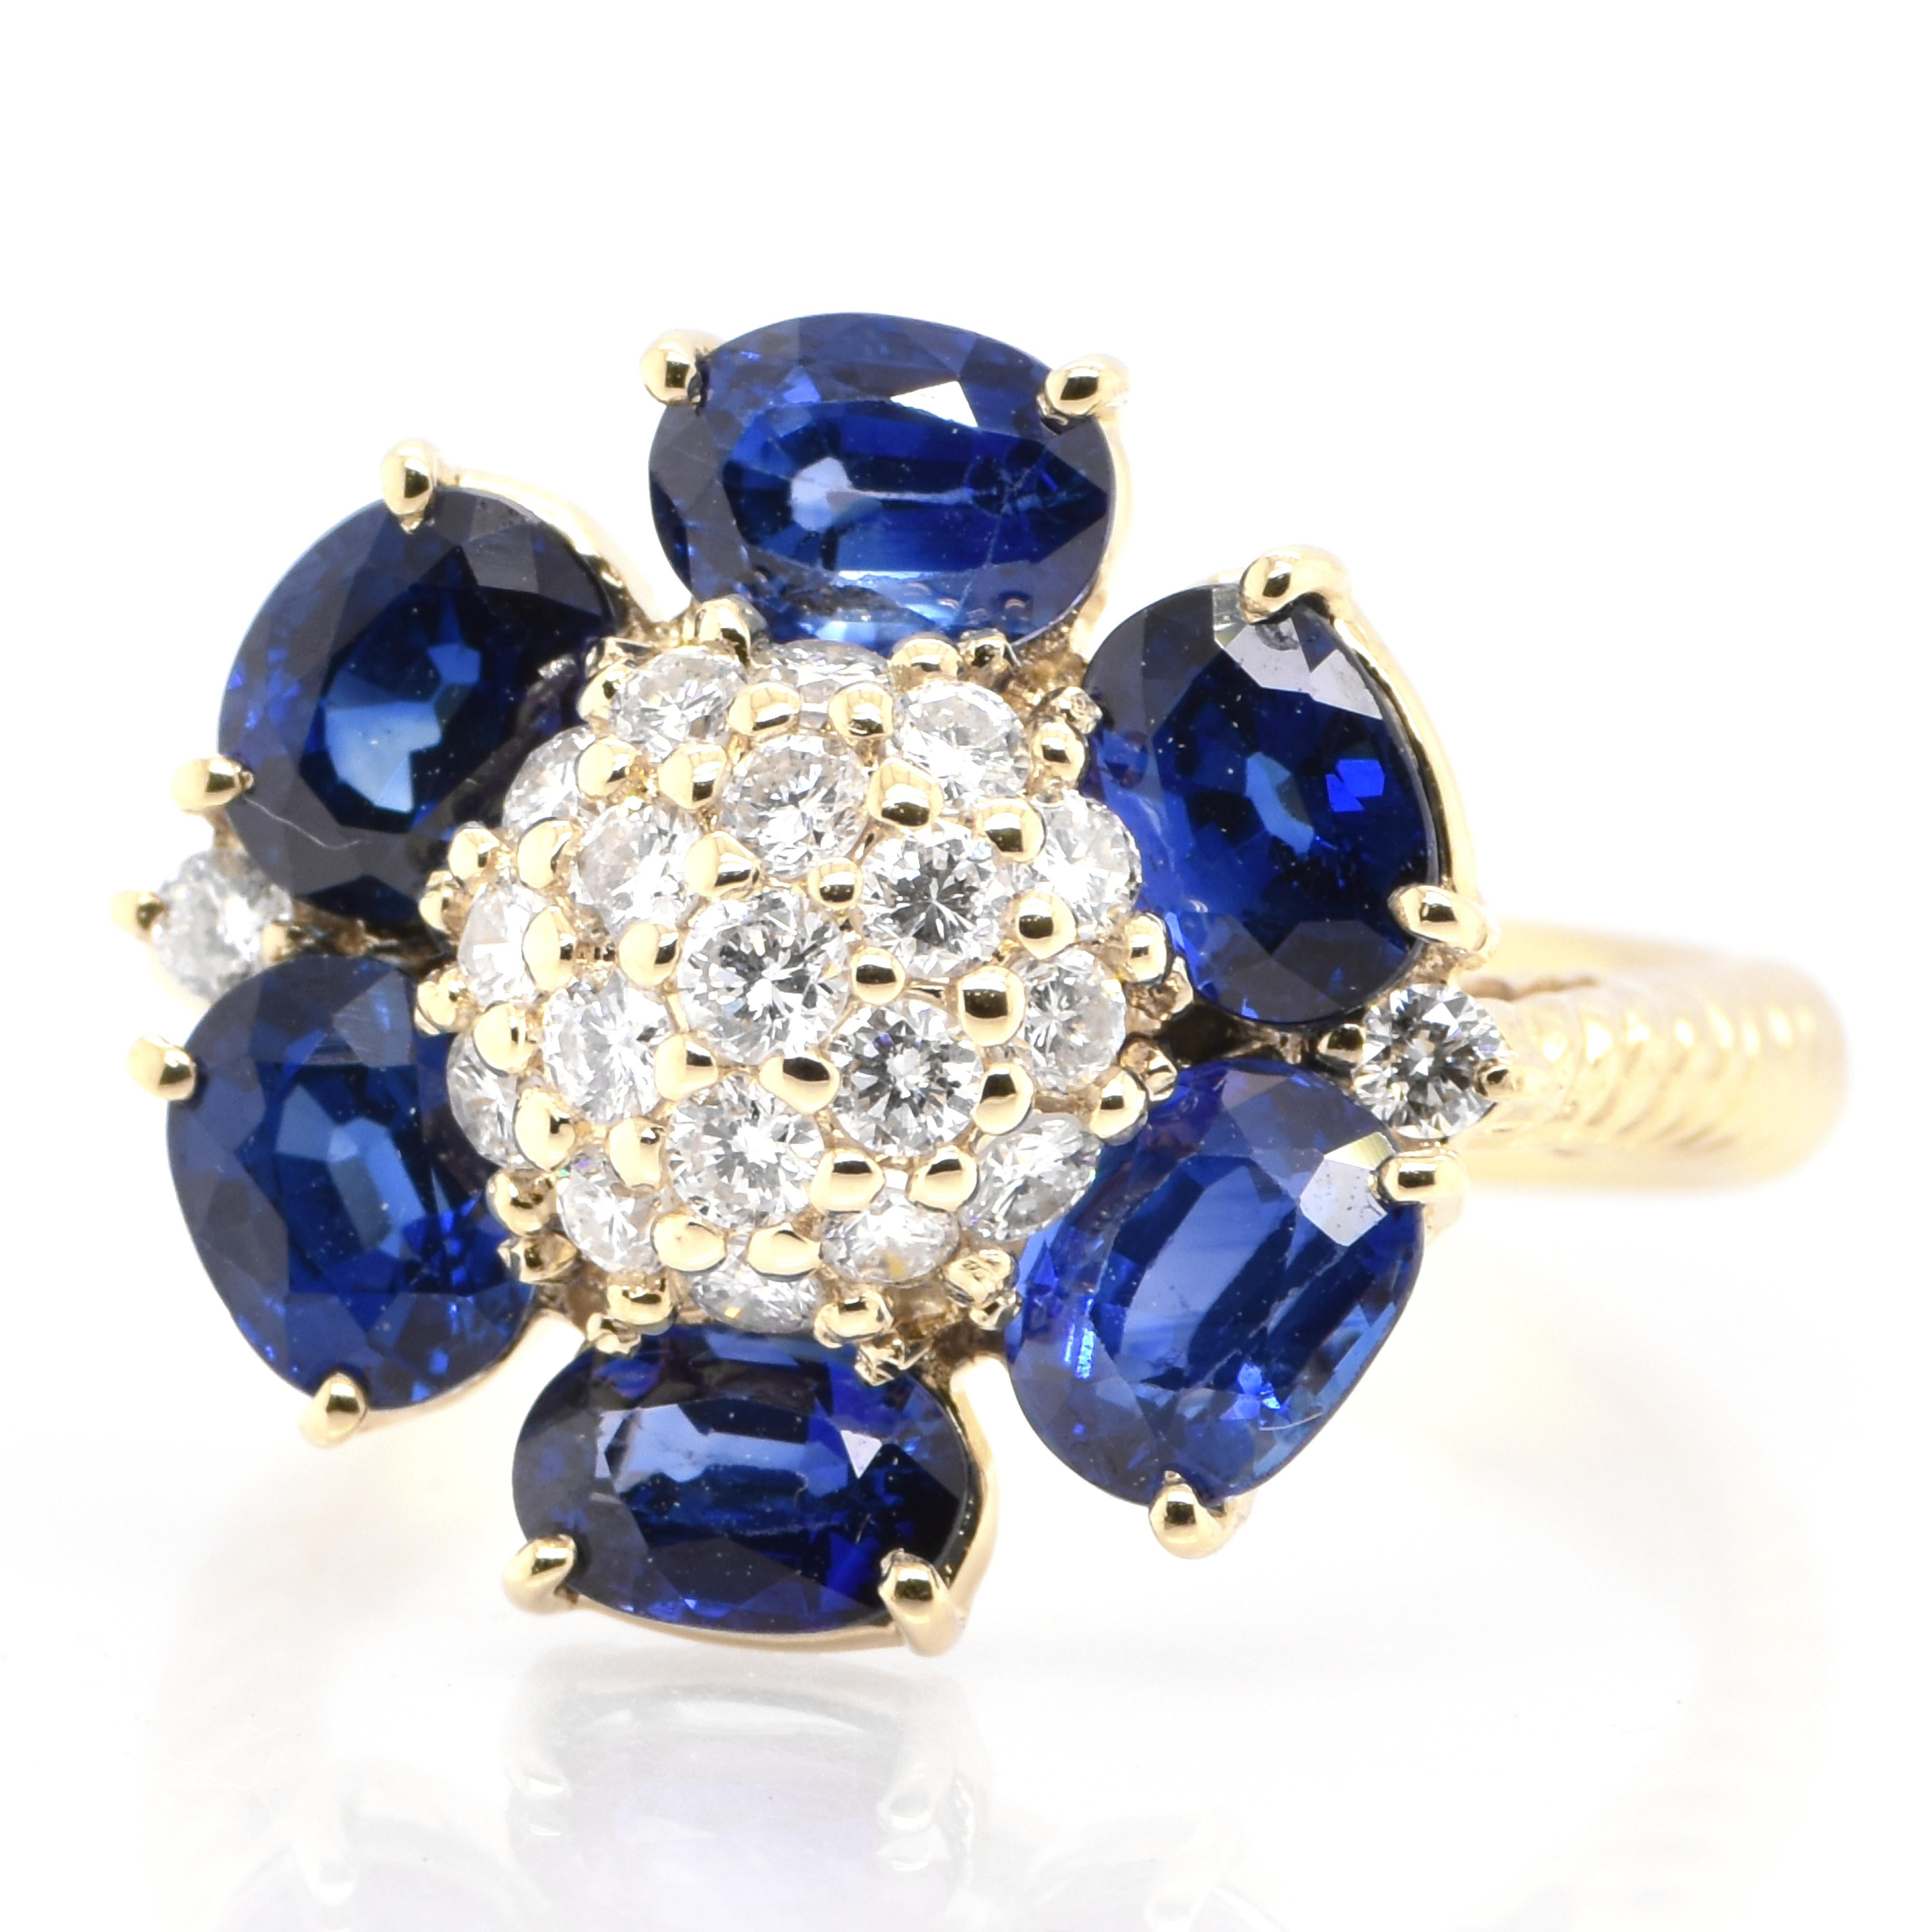 A beautiful Cluster ring featuring 3.46 Carat, Natural Sapphire and 0.45 Carats Diamond Accents set in 18 Karat Gold. Sapphires have extraordinary durability - they excel in hardness as well as toughness and durability making them very popular in